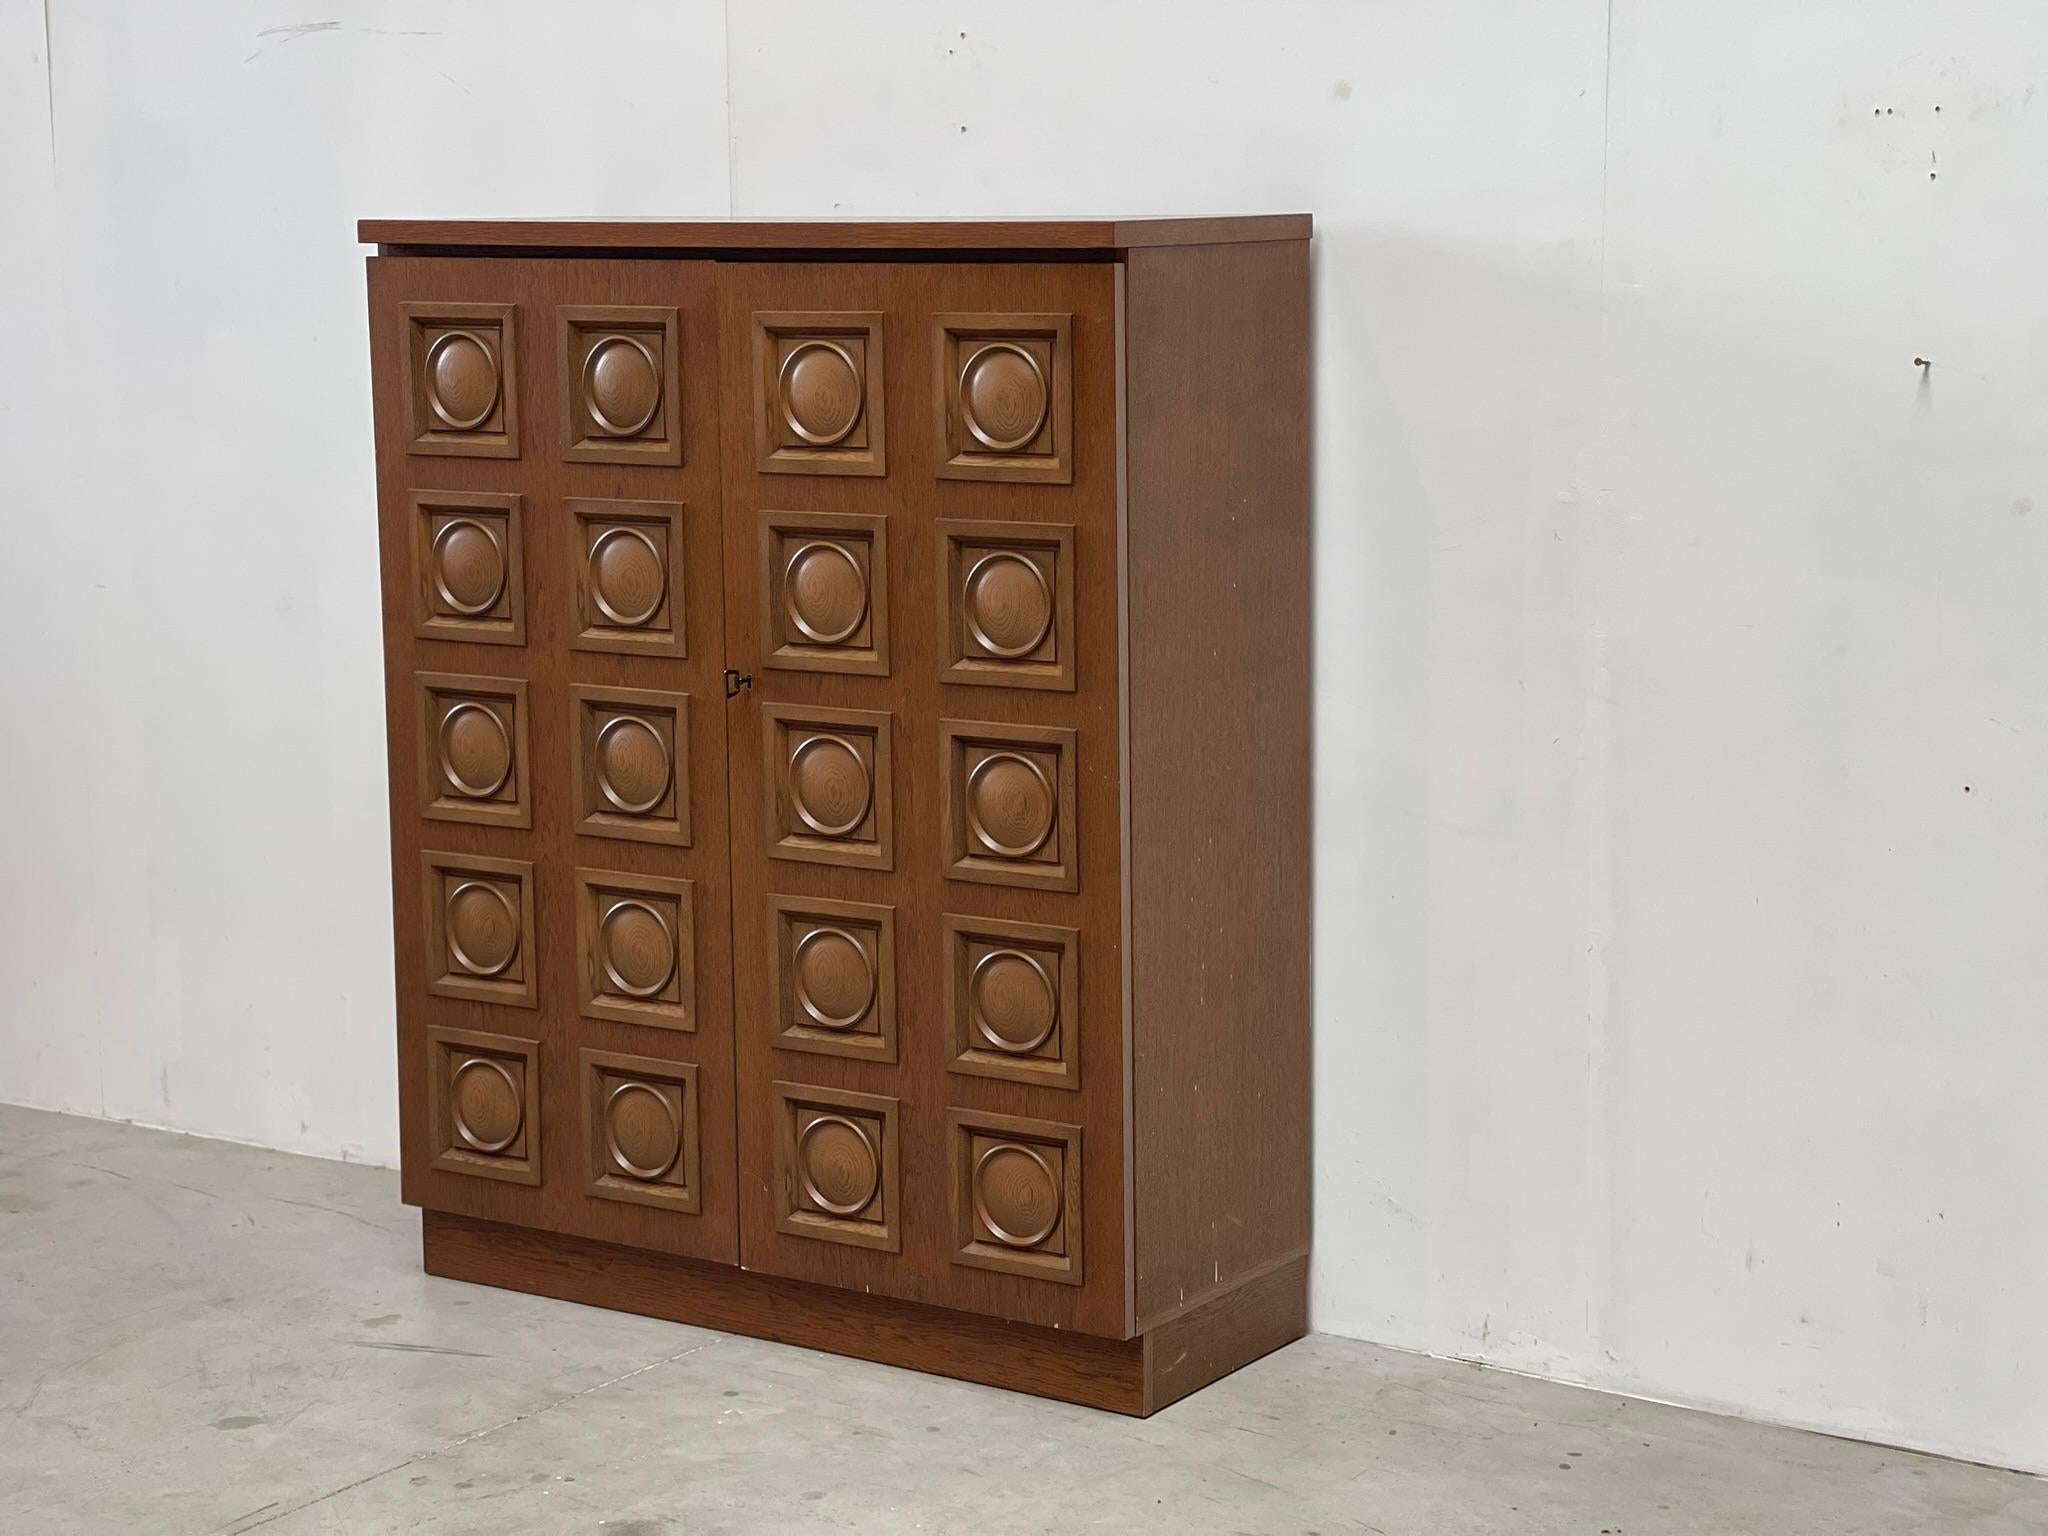 Two tone oak graphical door brutalist (bar) cabinet.

Stately piece of furniture which offers plenty of storage space and made out of high quality oak panels.

Good condition.

1970s - Belgium

Dimensions:
Height: 135cm
Width: 110cm
Depth